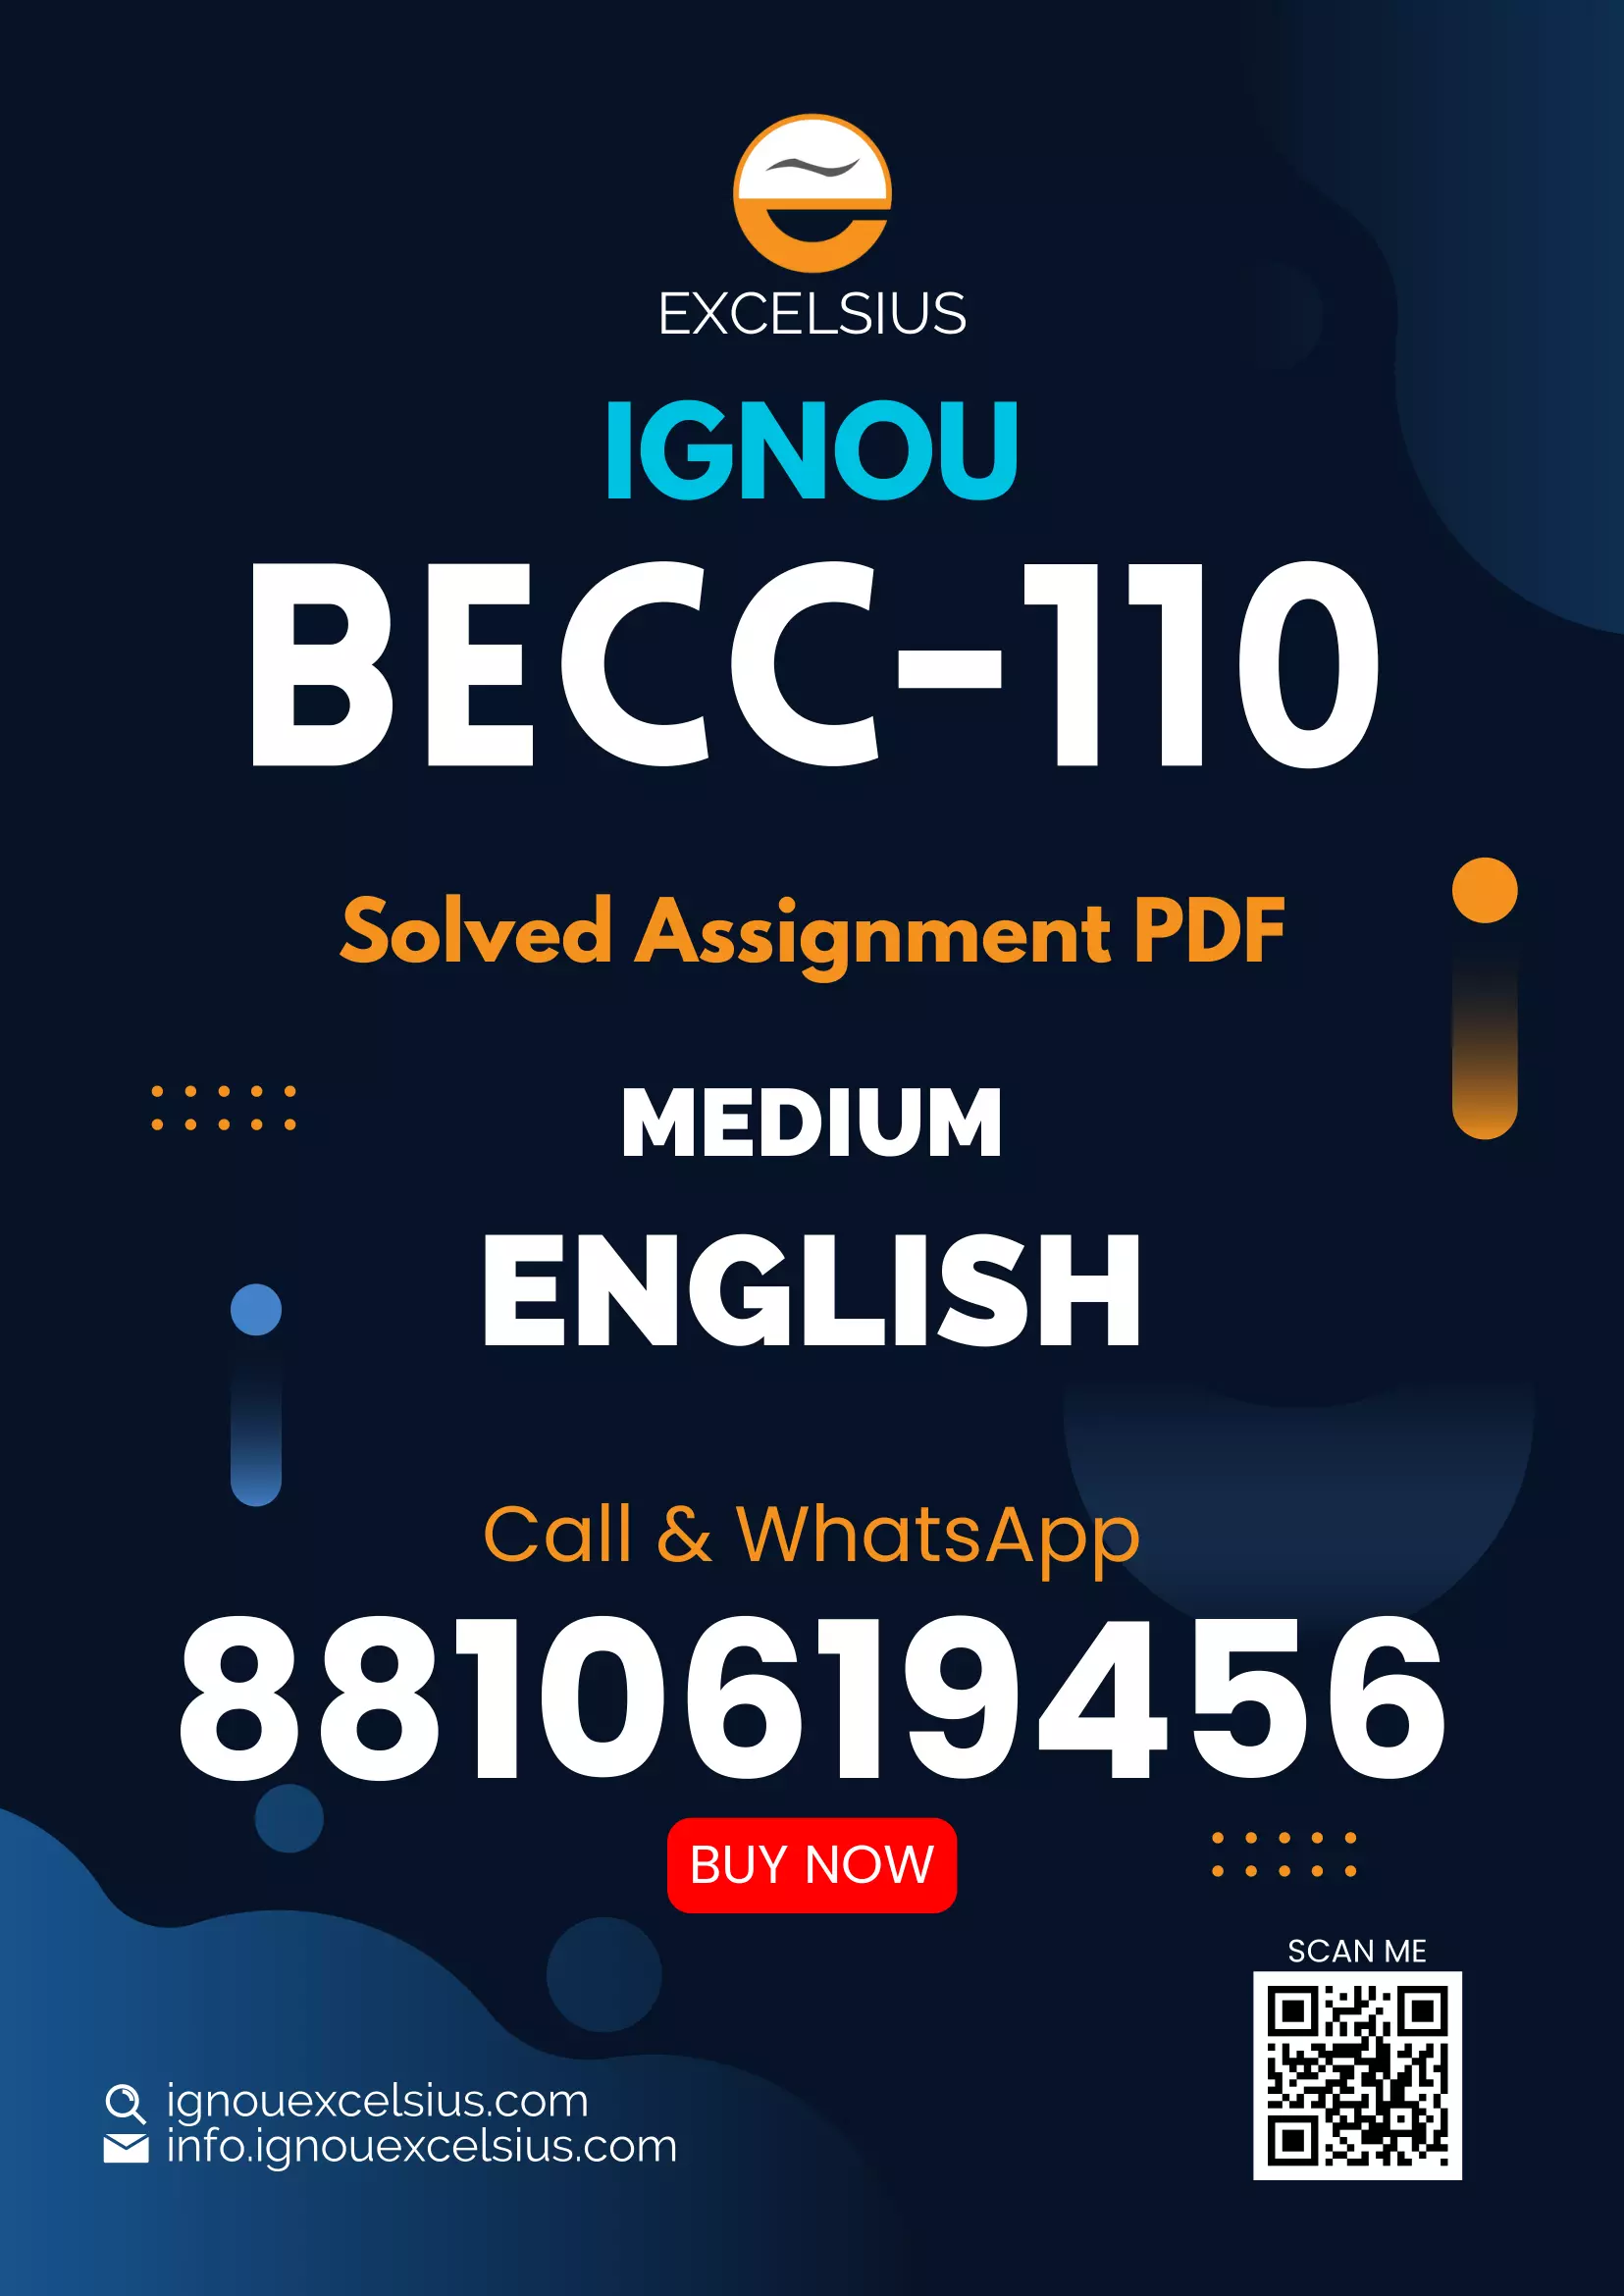 IGNOU BECC-110 - Introductory Econometrics, Latest Solved Assignment-July 2022 – January 2023